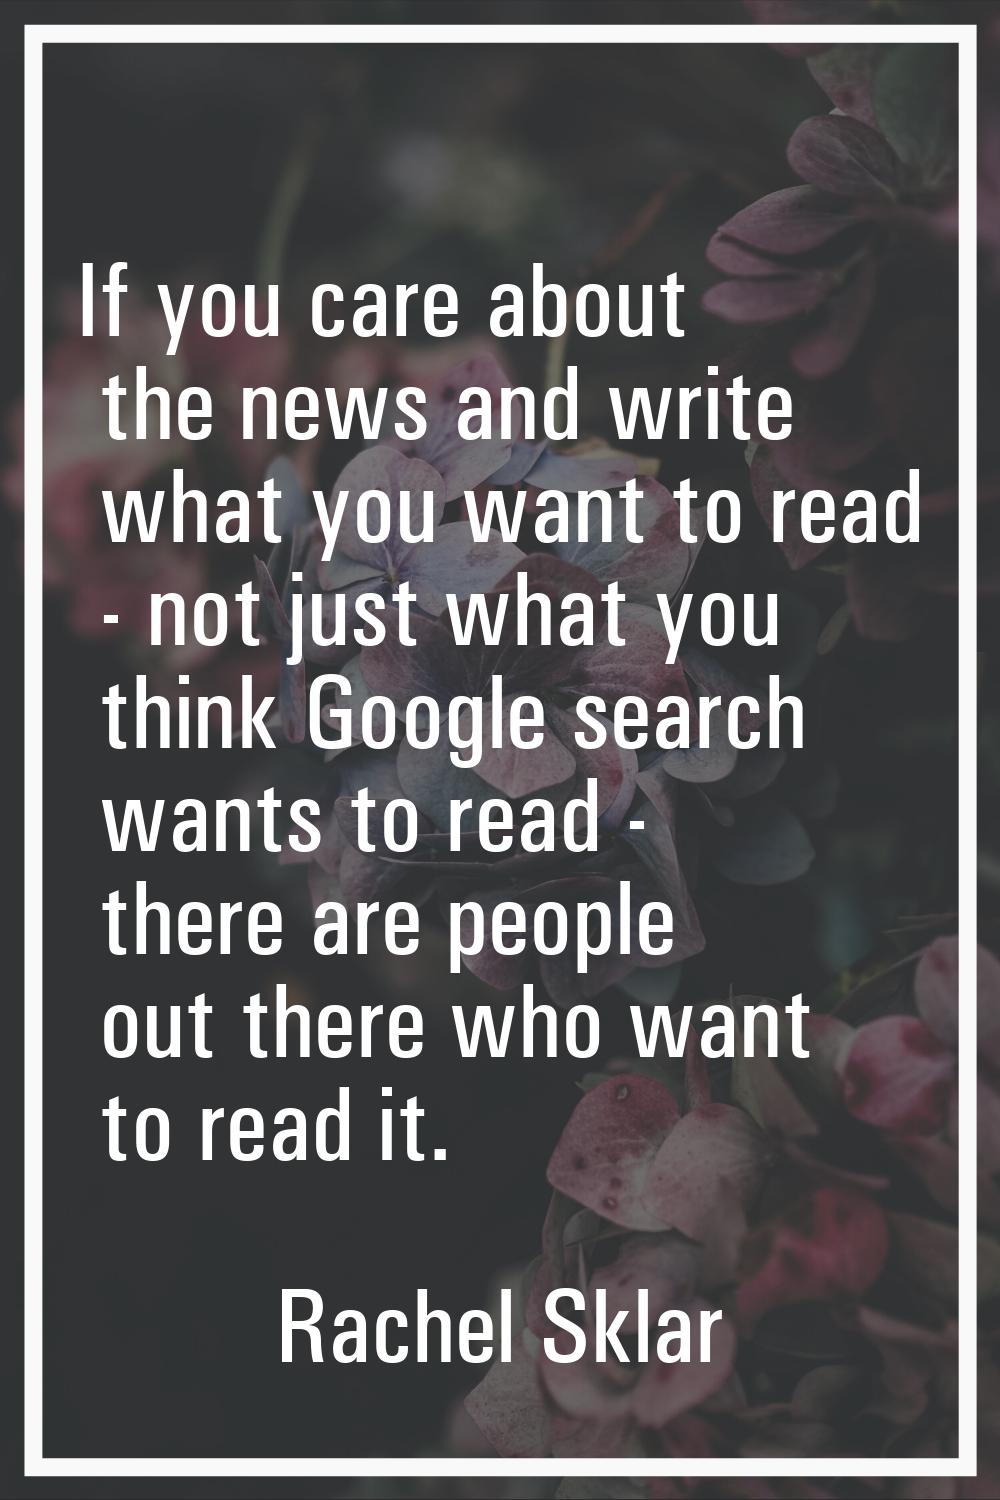 If you care about the news and write what you want to read - not just what you think Google search 